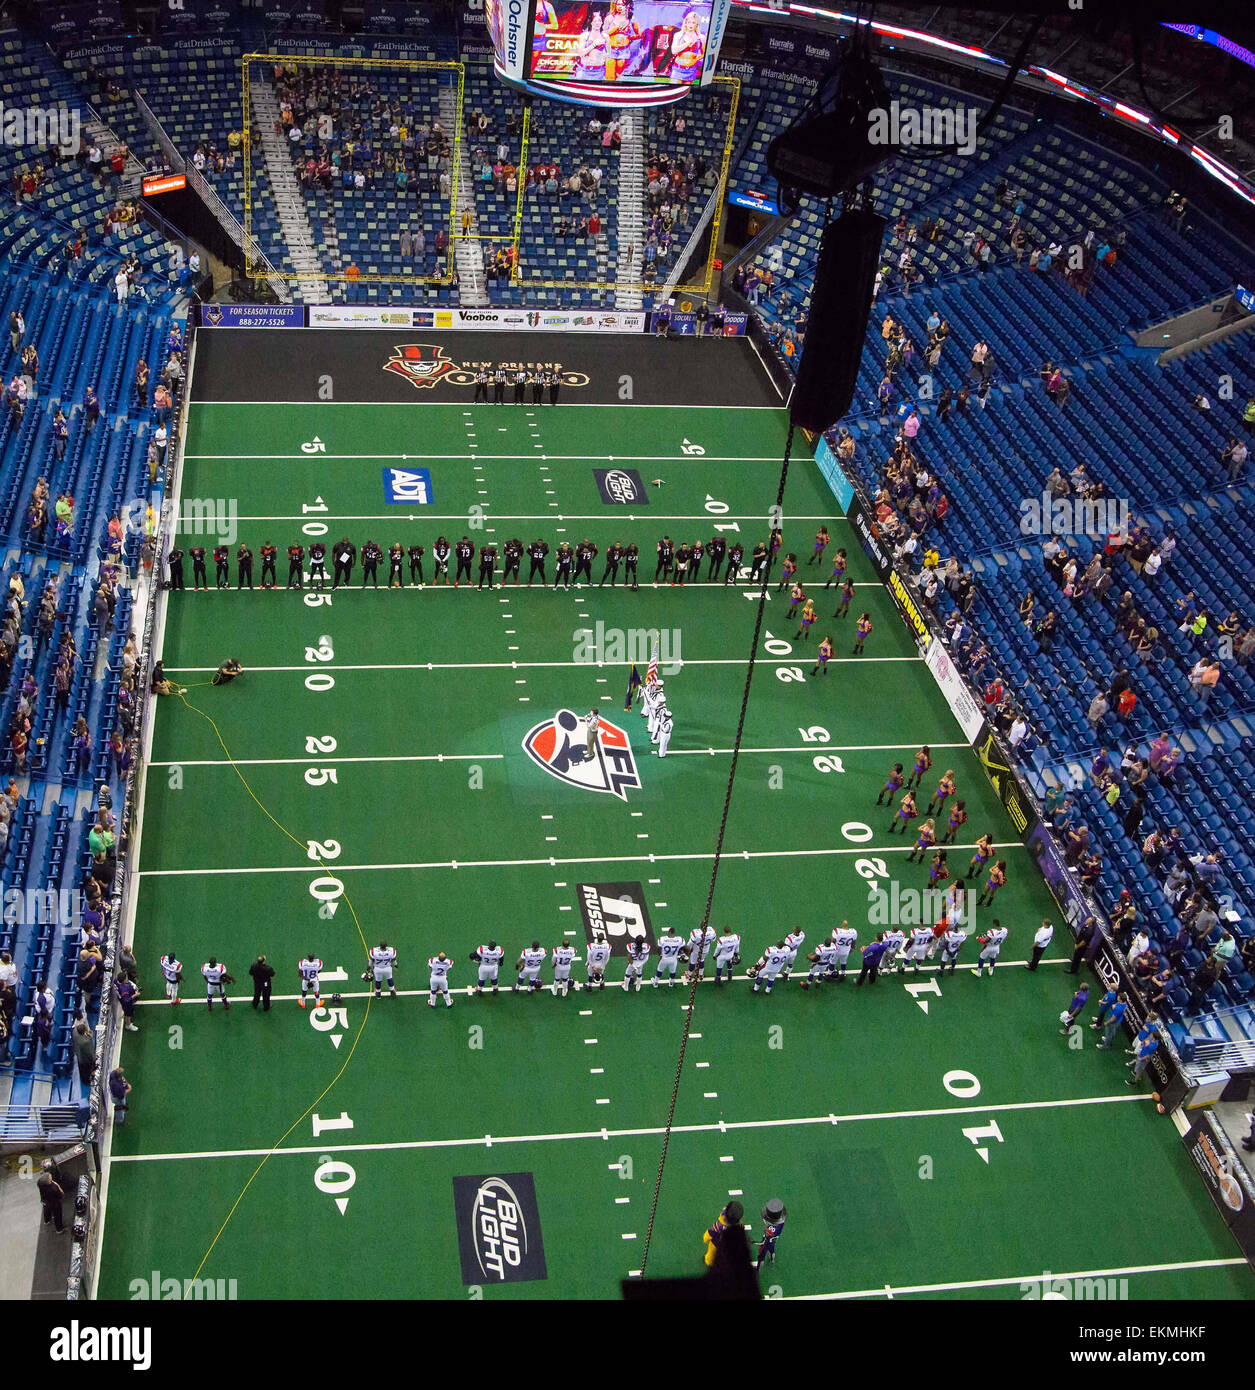 April 11, 2015 - Smoothie King Center above view of the national being sung  during the game between the Orlando Predators and New Orleans VooDoo at Smoothie  King Center in New Orleans